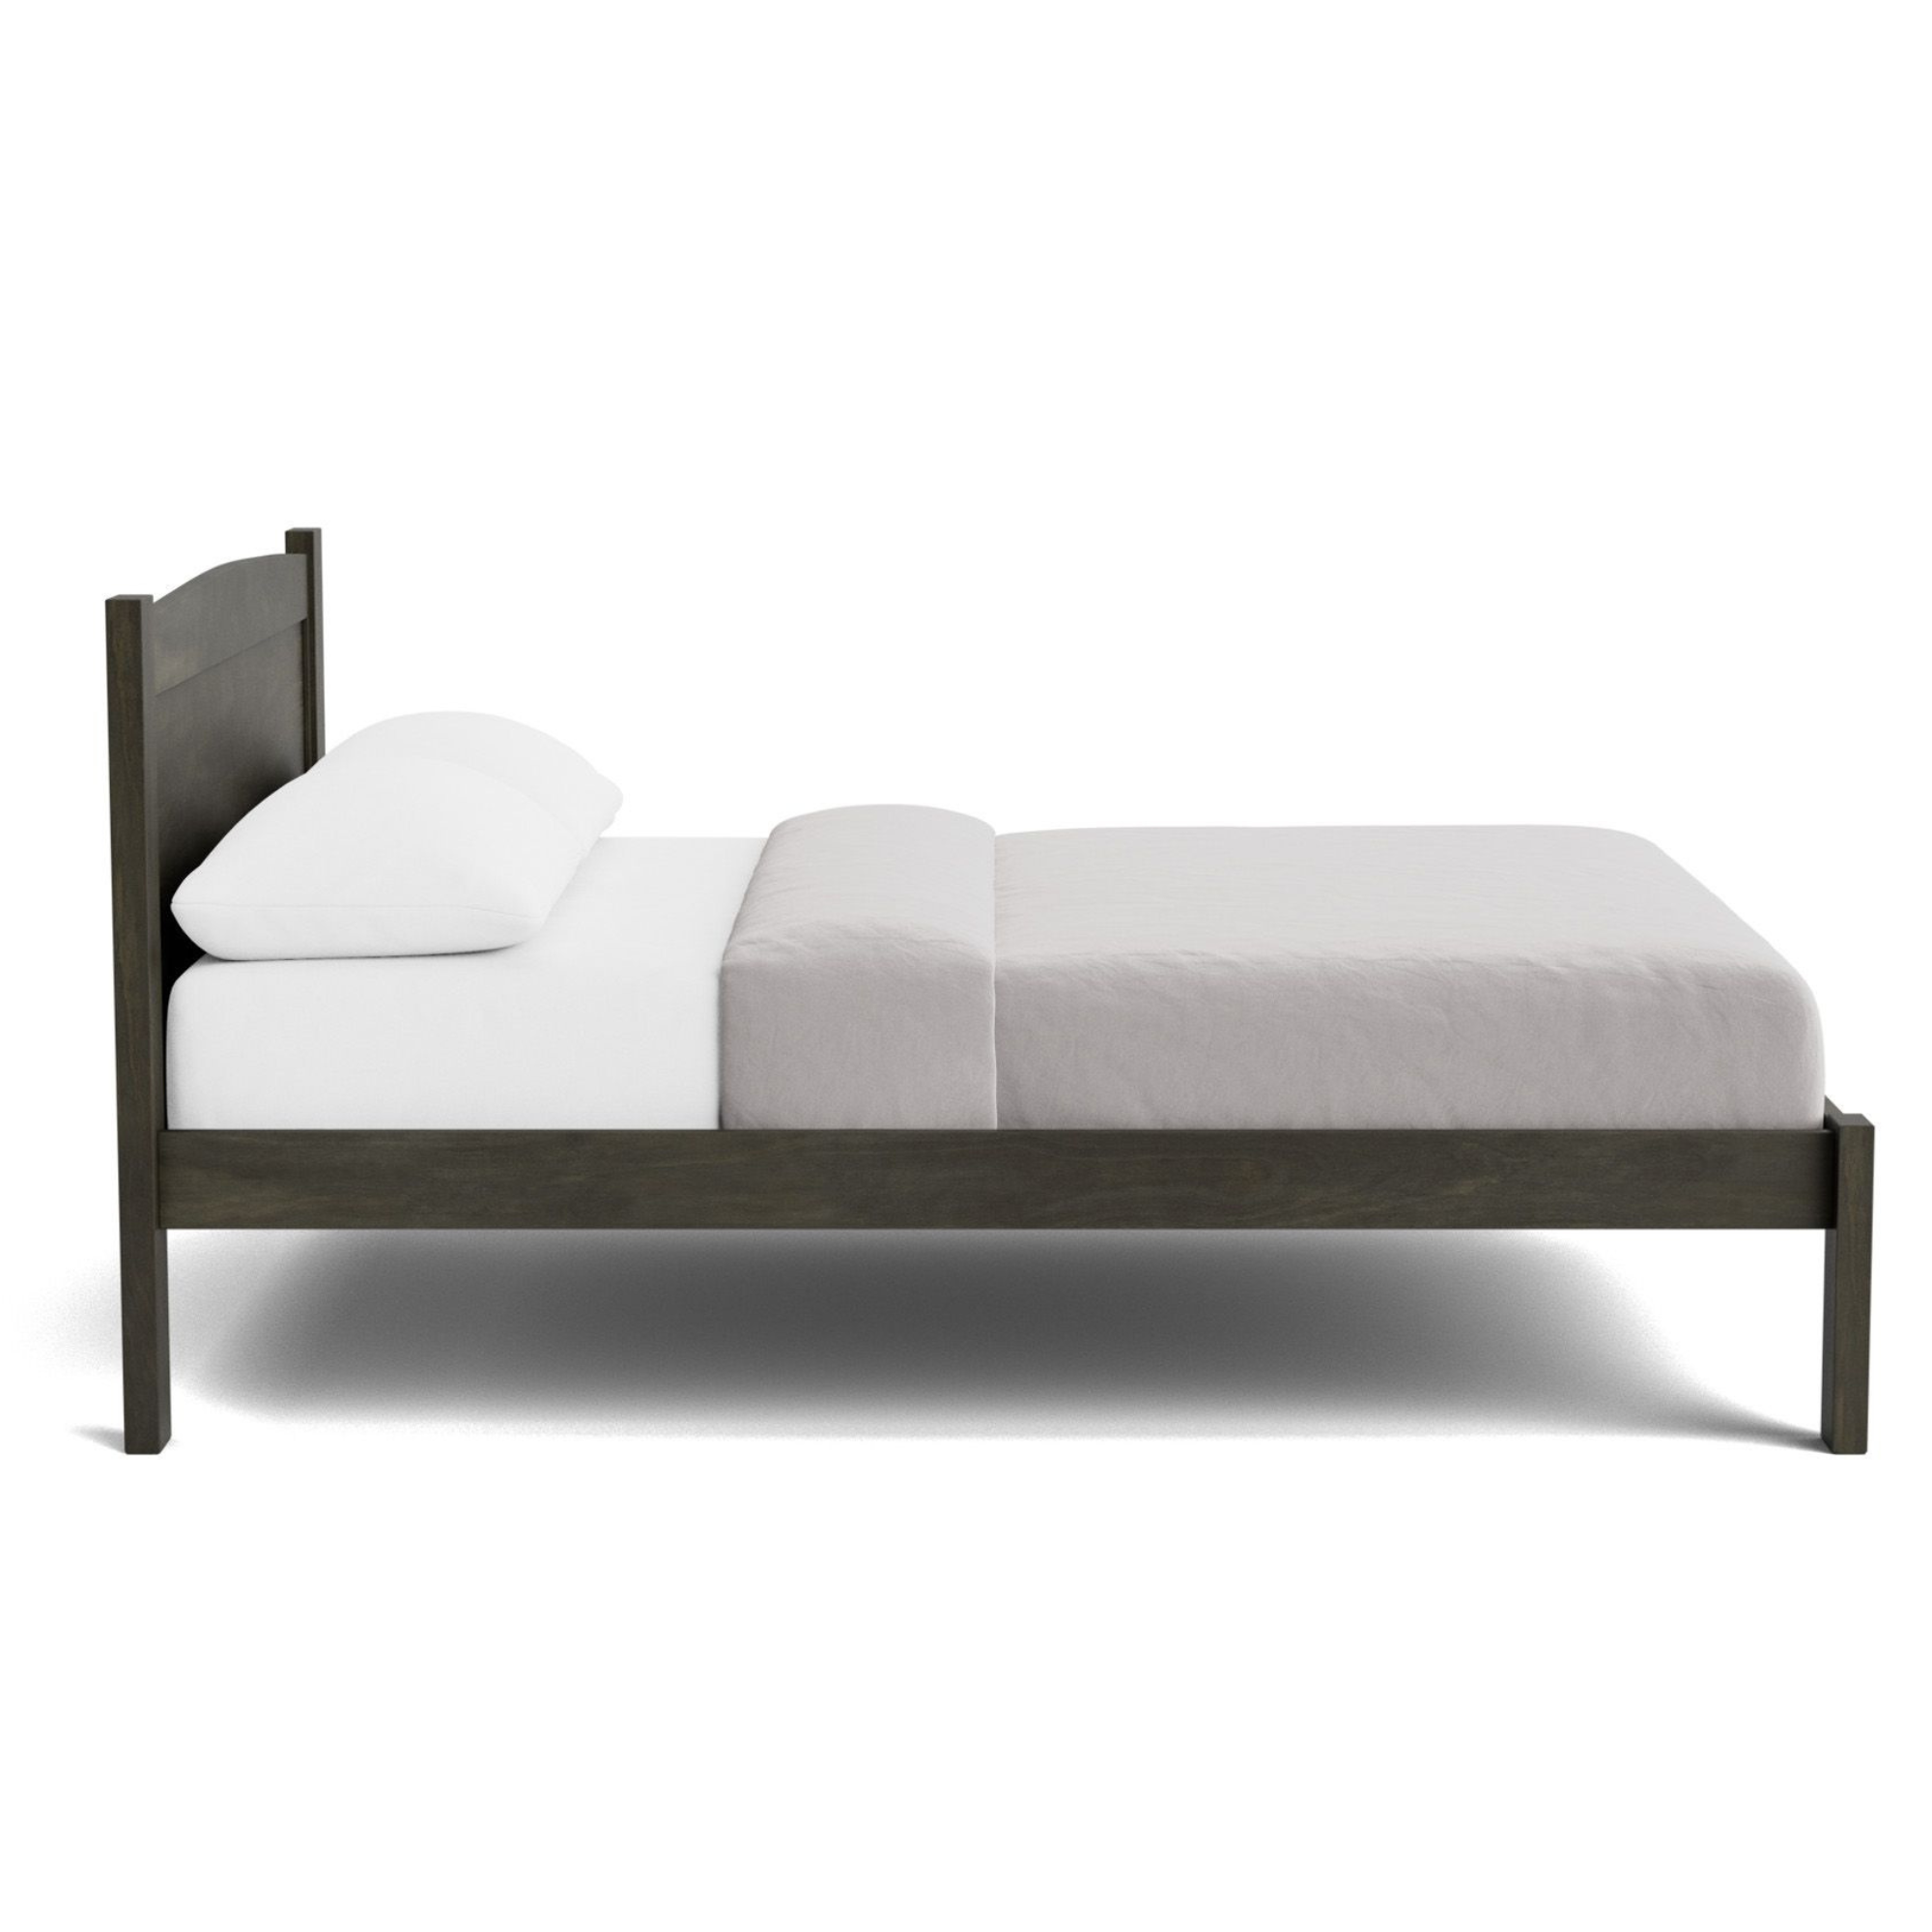 HUGO HIGH OR LOW FOOT PANELED BED | SINGLE TO SUPER KING | NZ MADE